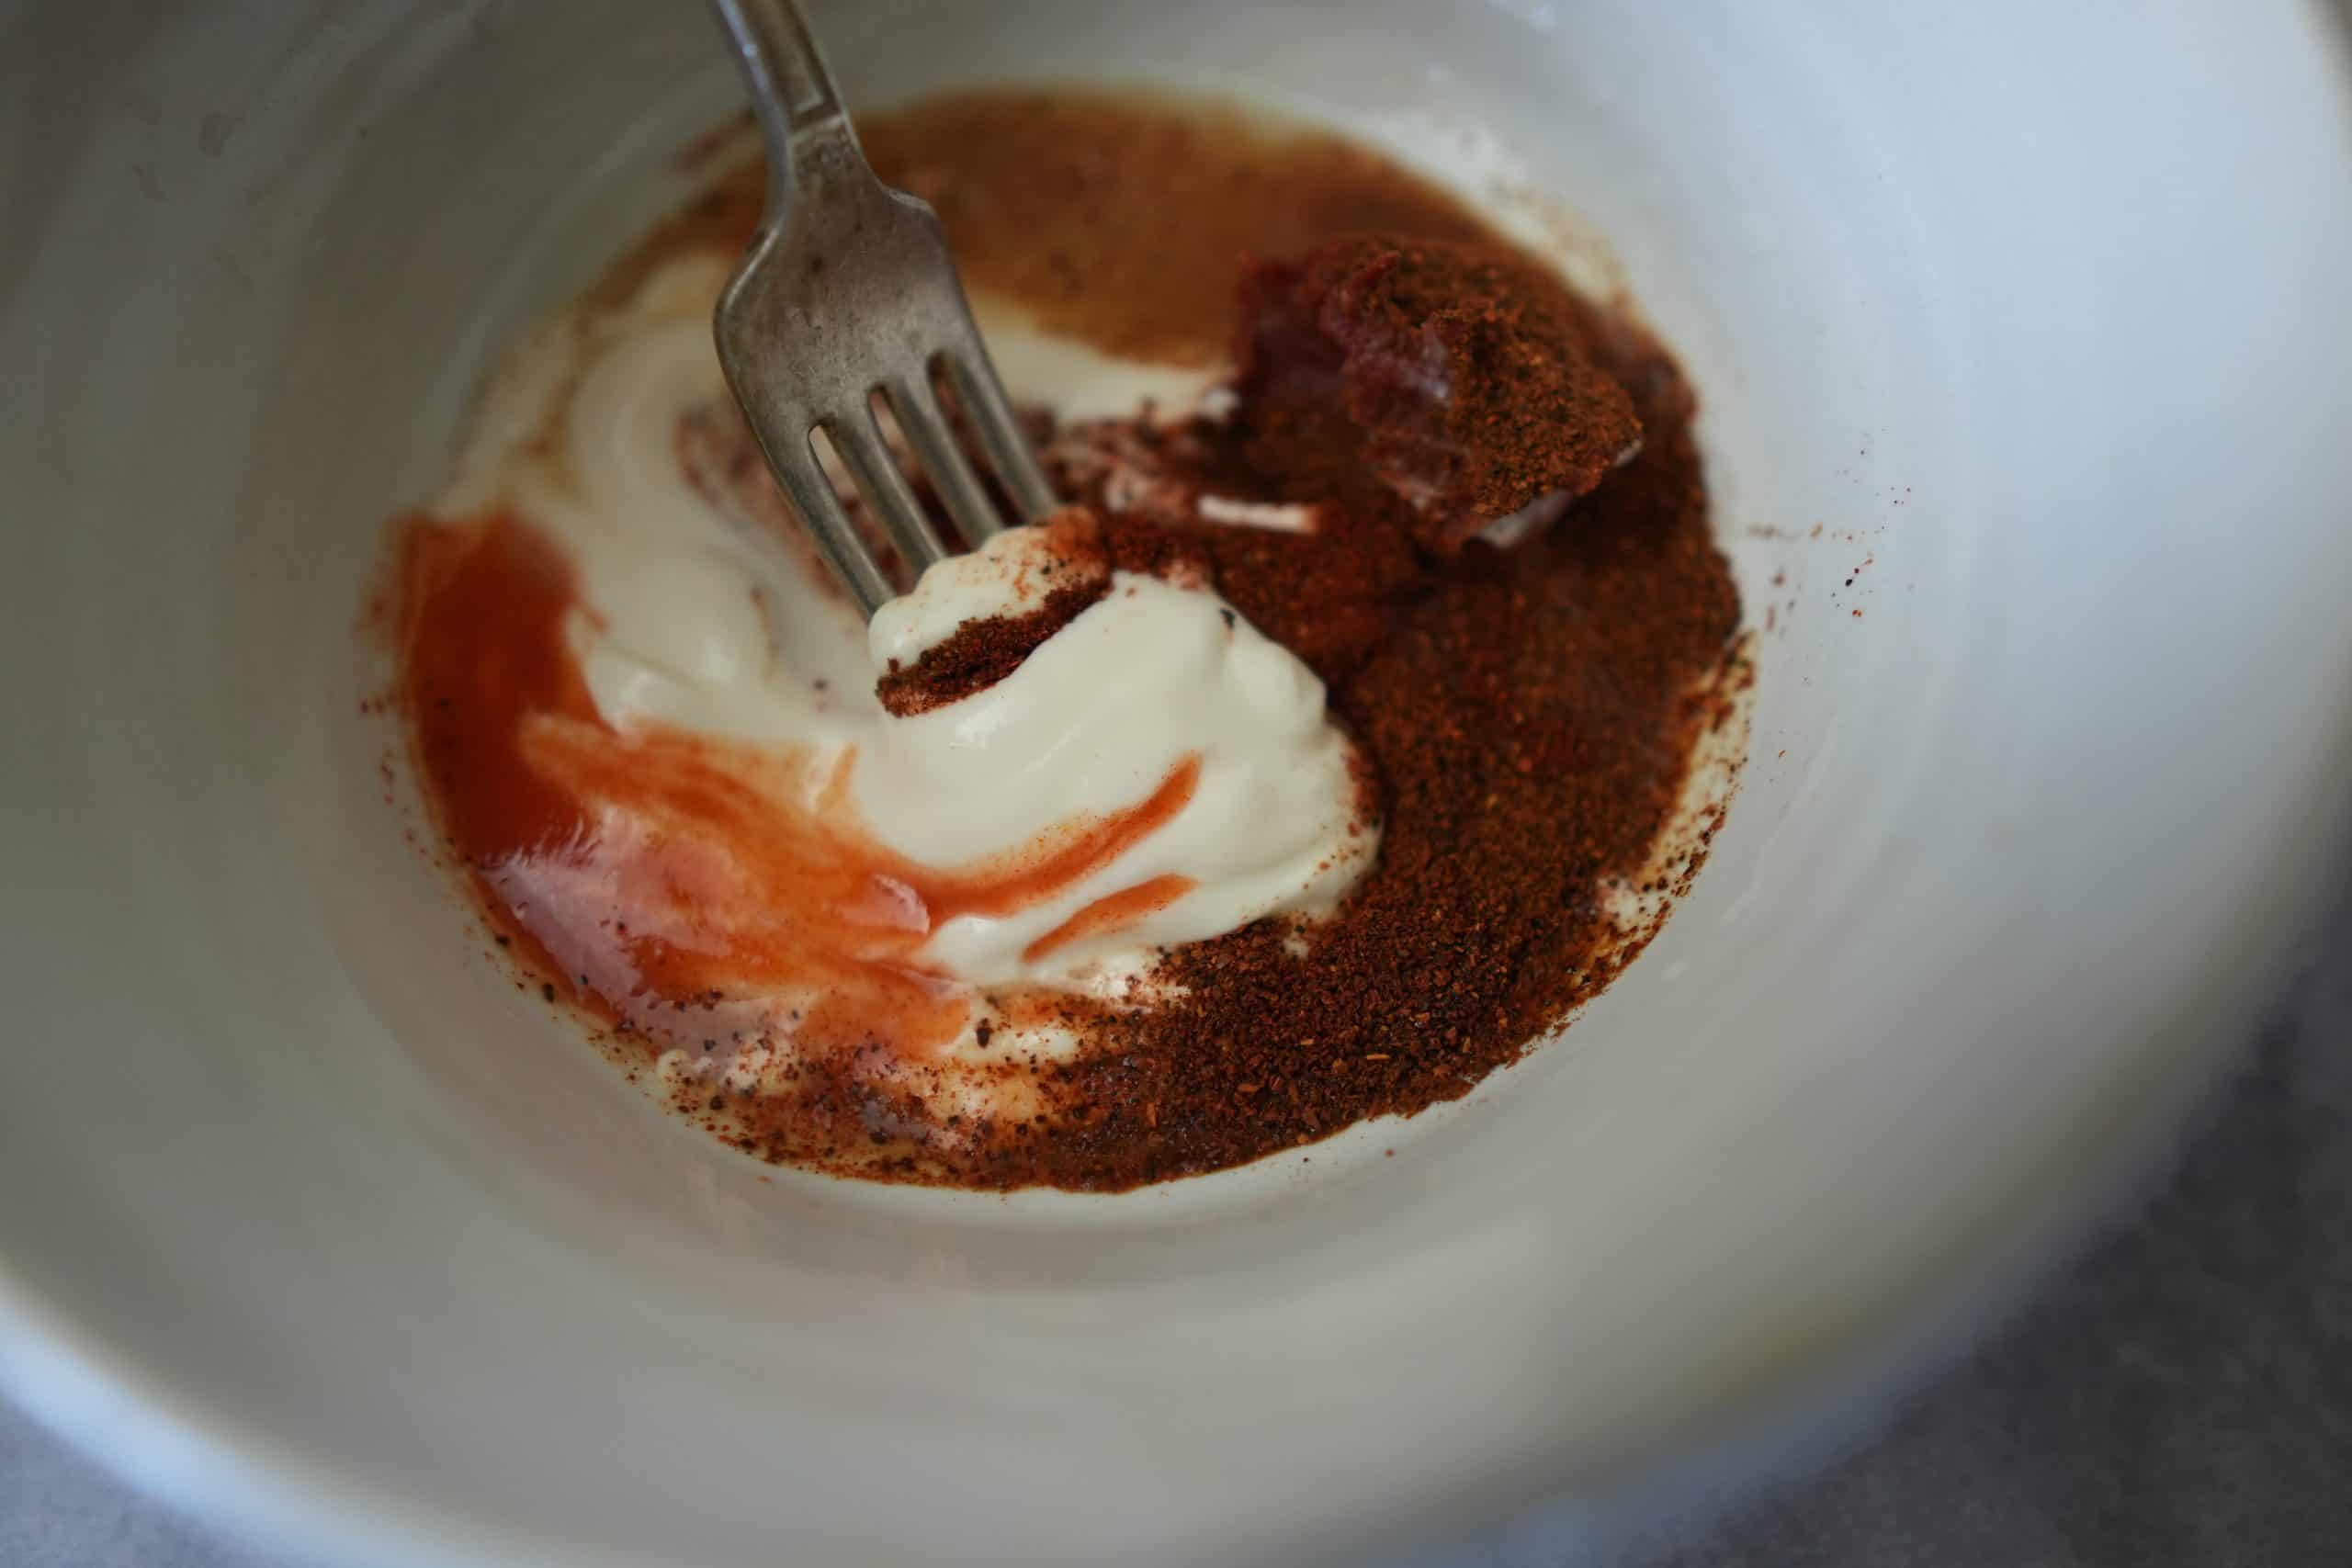 ancho chili mayo being mixed up in a small white bowl using the tines of a fork.